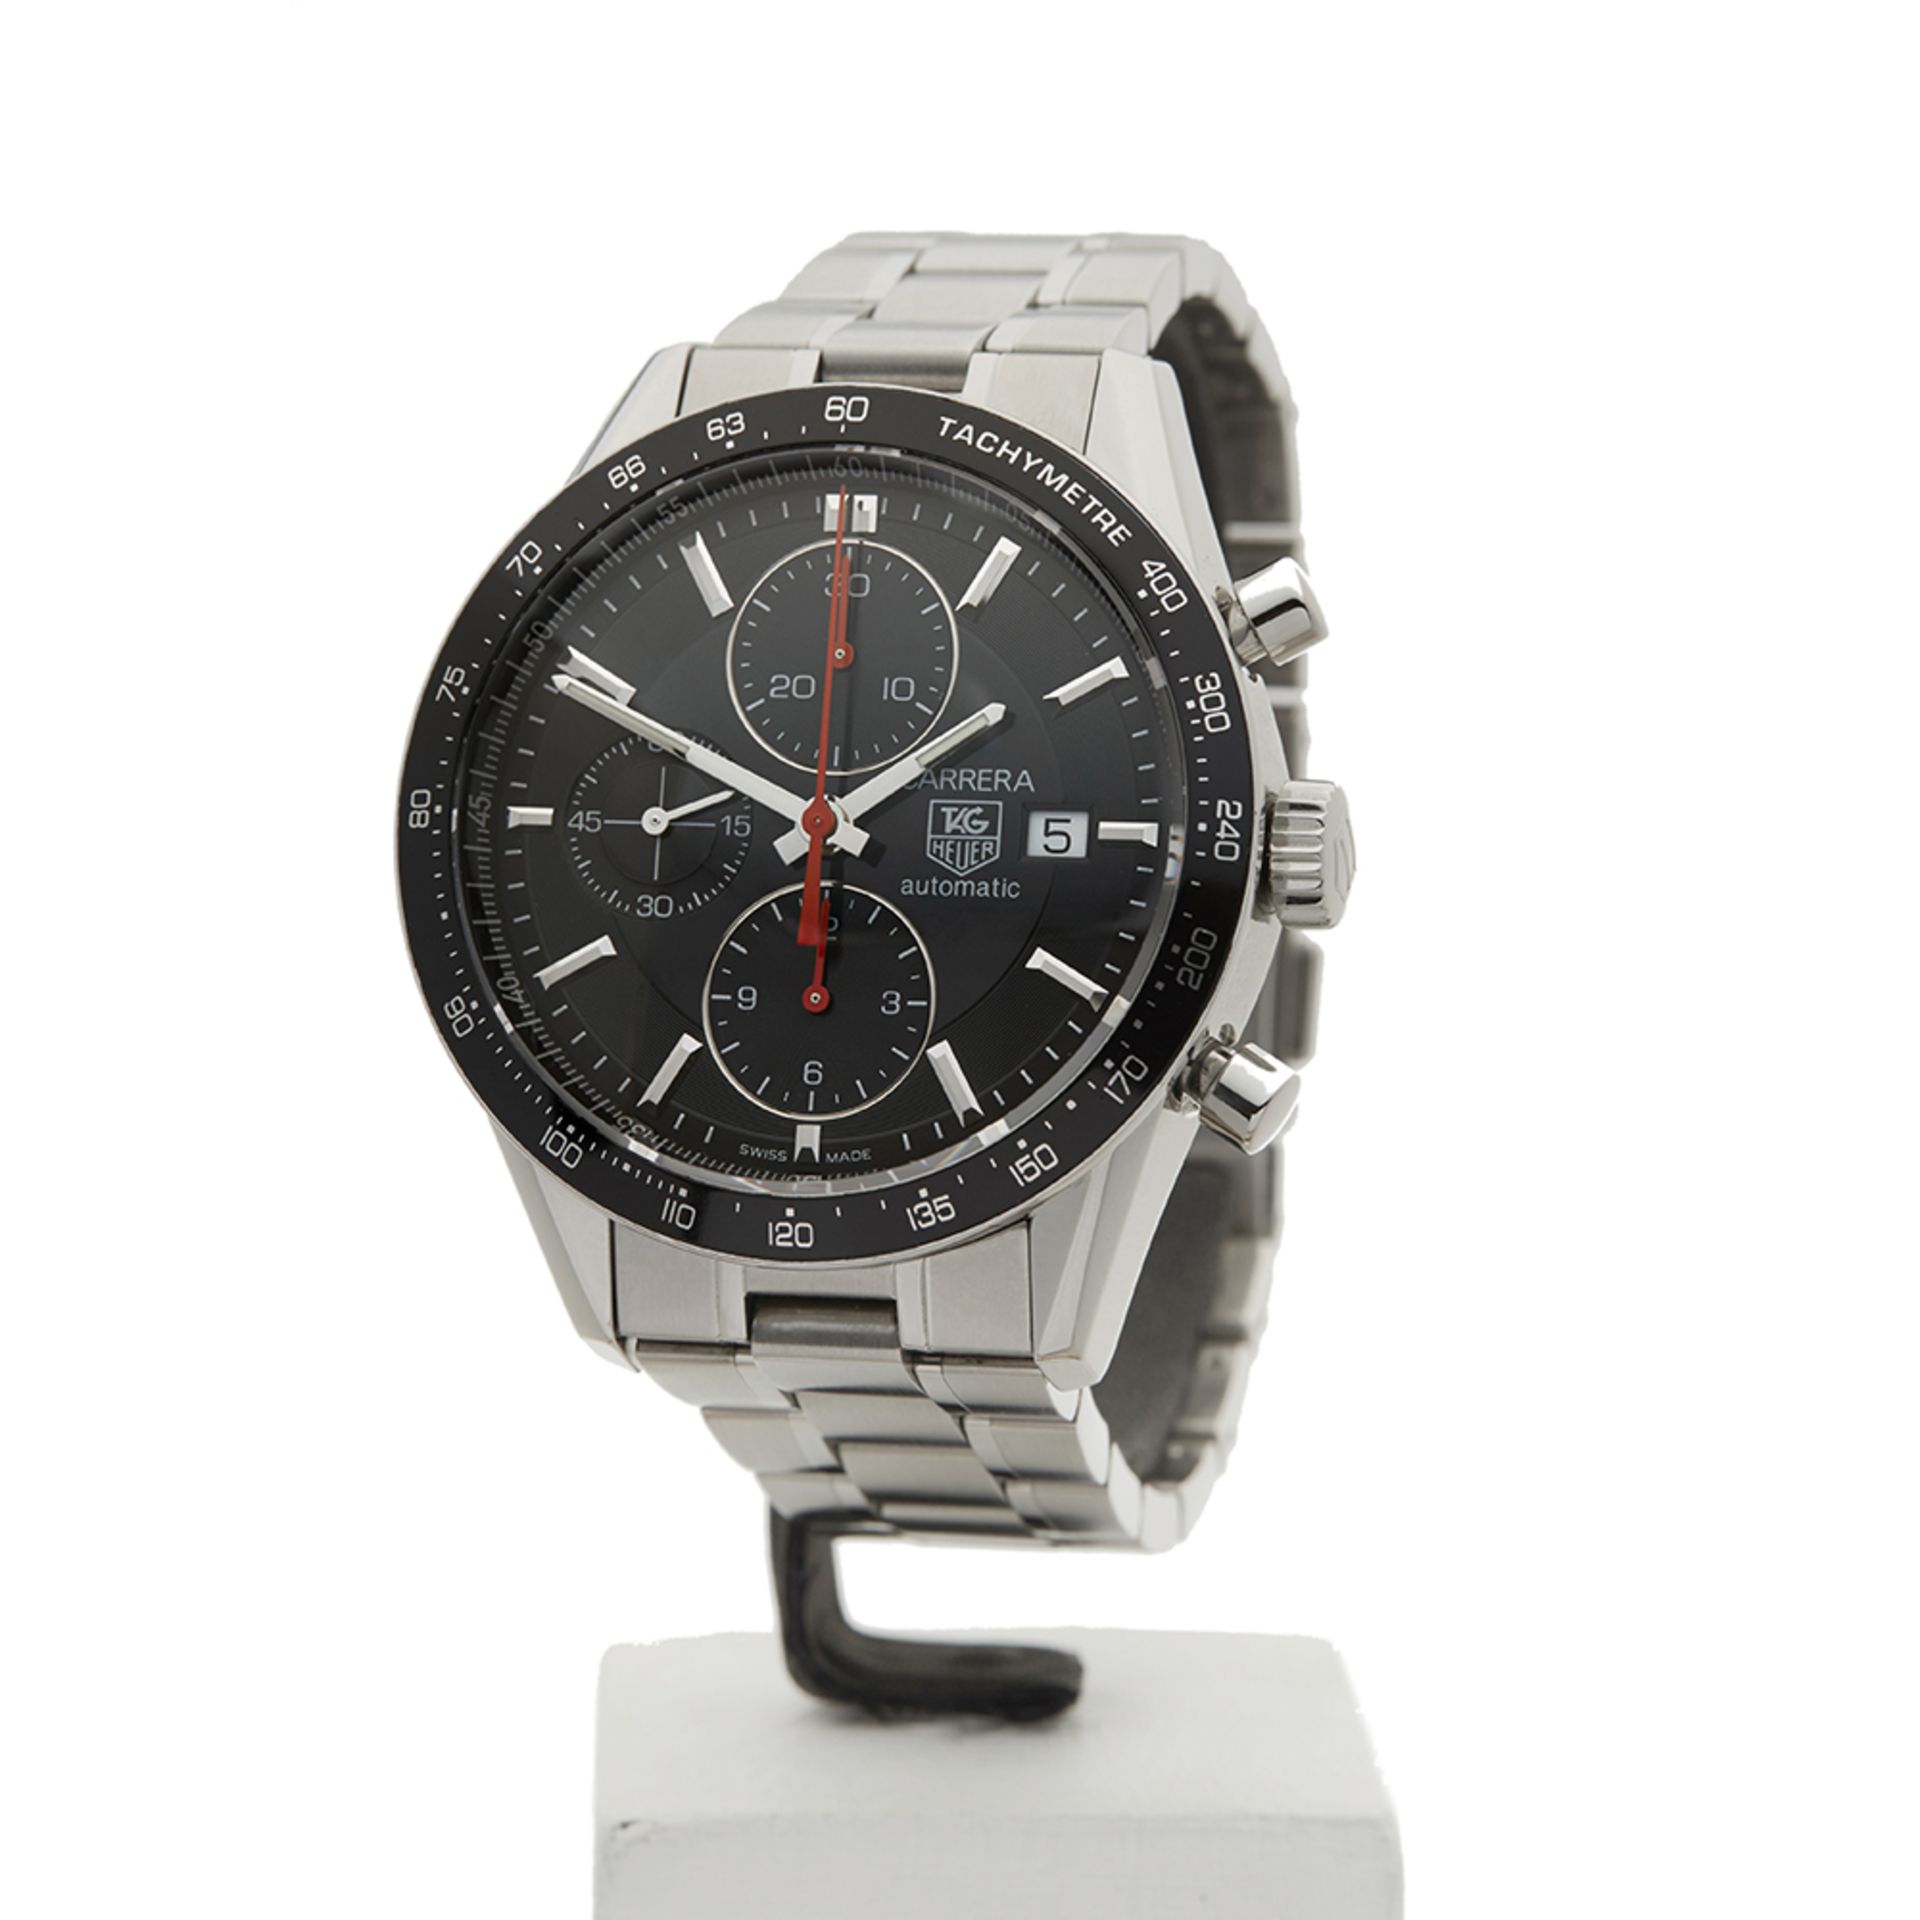 Tag Heuer Carrera Chronograph 41mm Stainless Steel - CV2014.BA0794 - Image 3 of 8